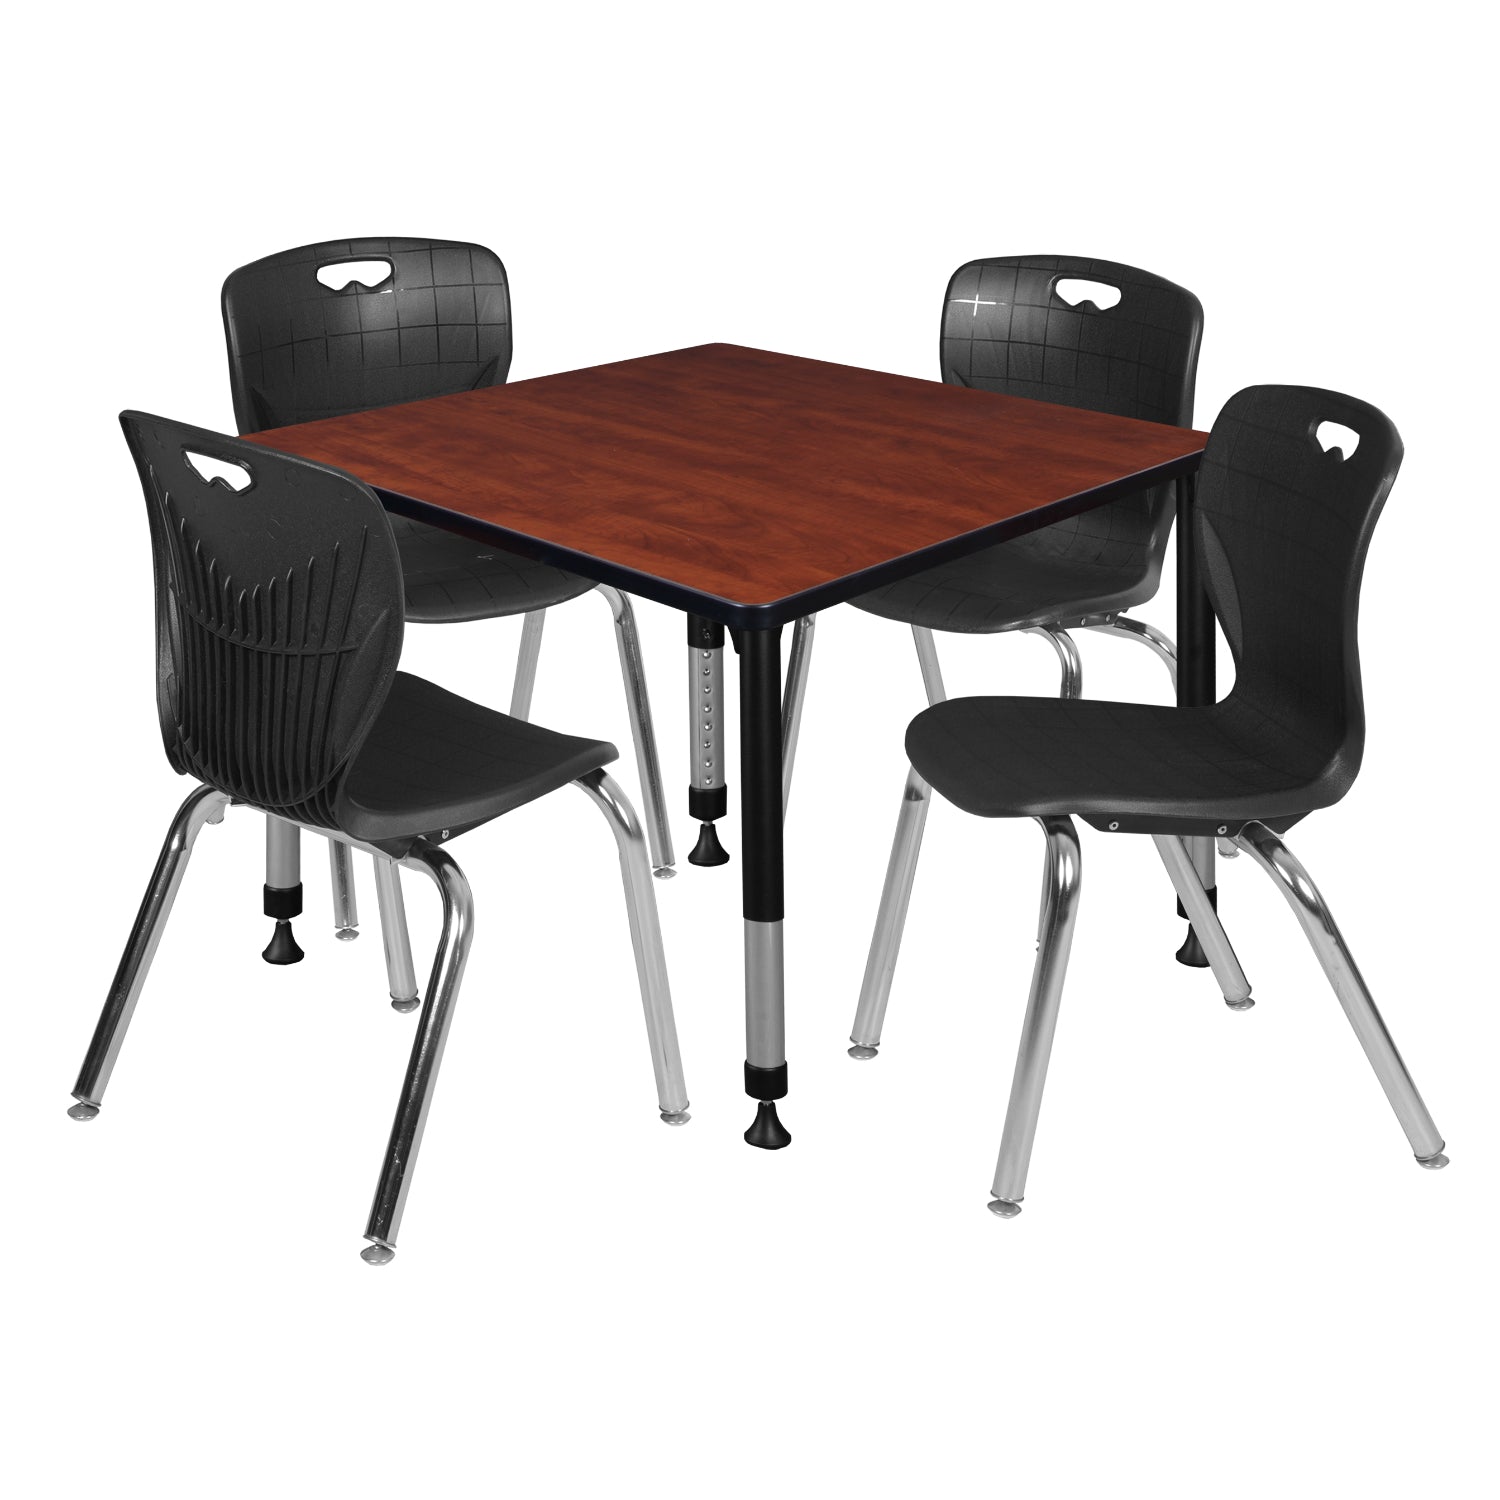 Kee Classroom Table and Chair Package, Kee 42" Square Adjustable Height Table with 4 Andy 18" Stack Chairs